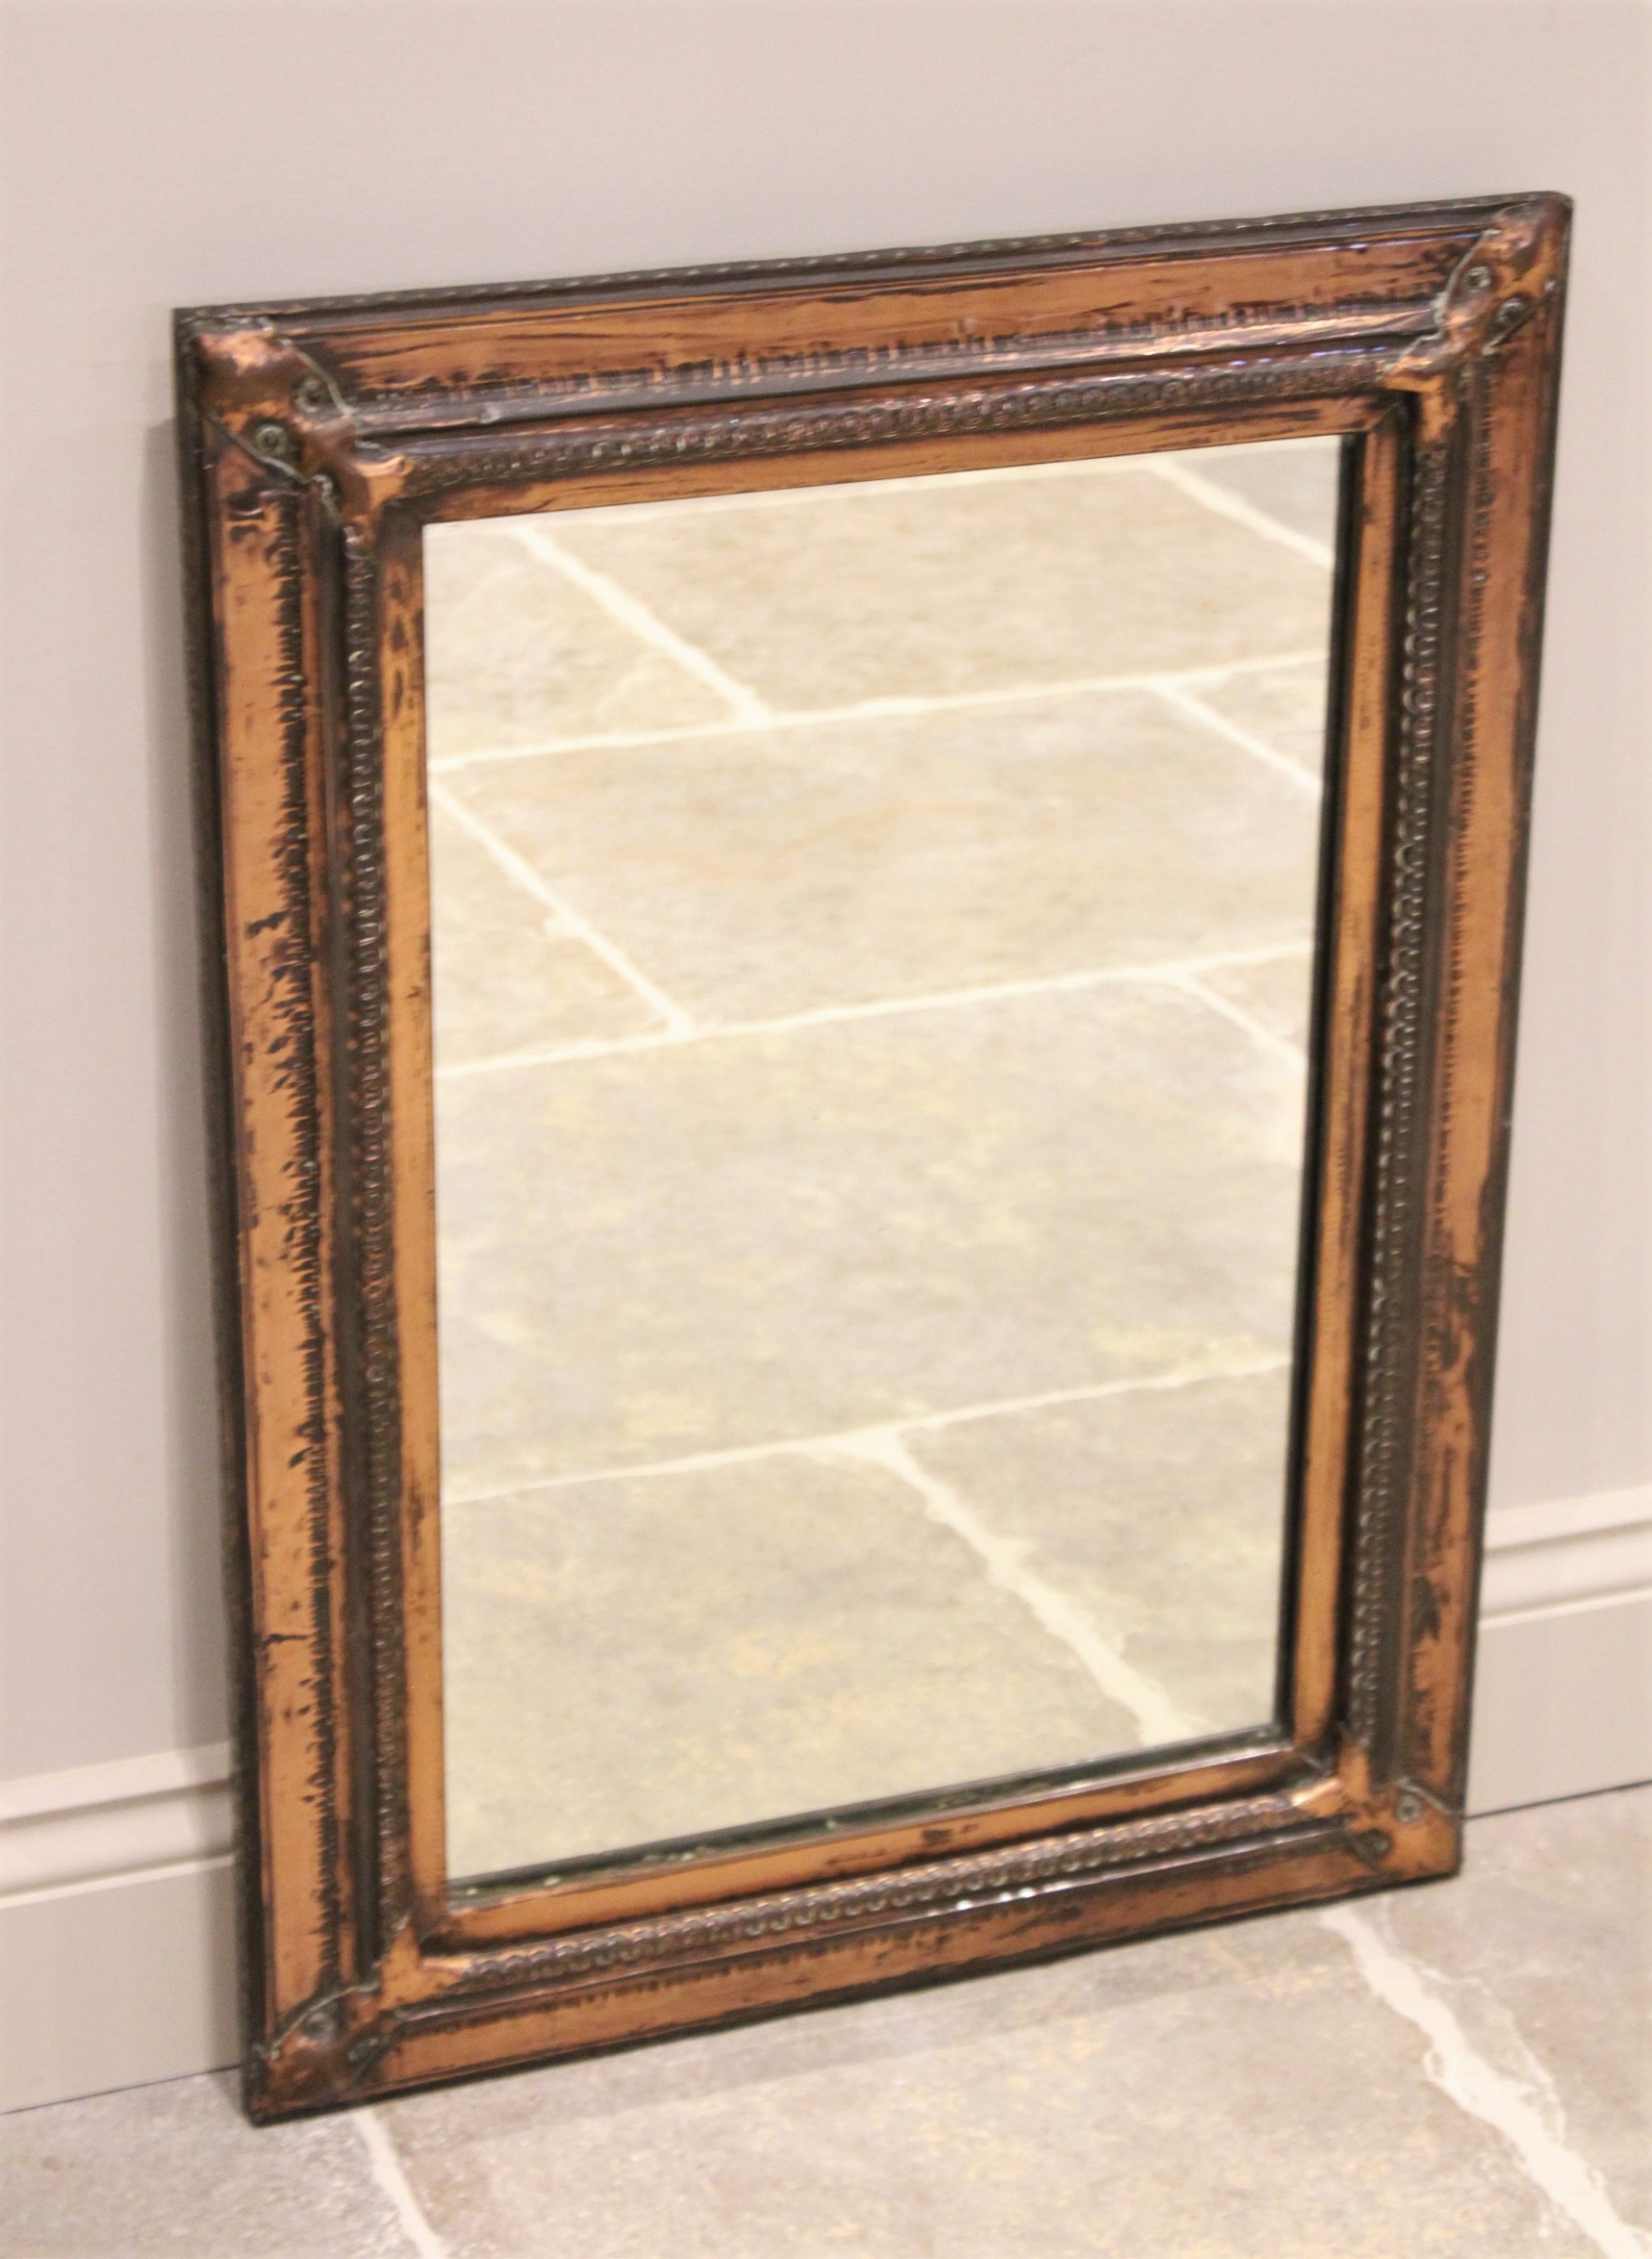 An early 20th century Arts and Crafts copper wall mirror,